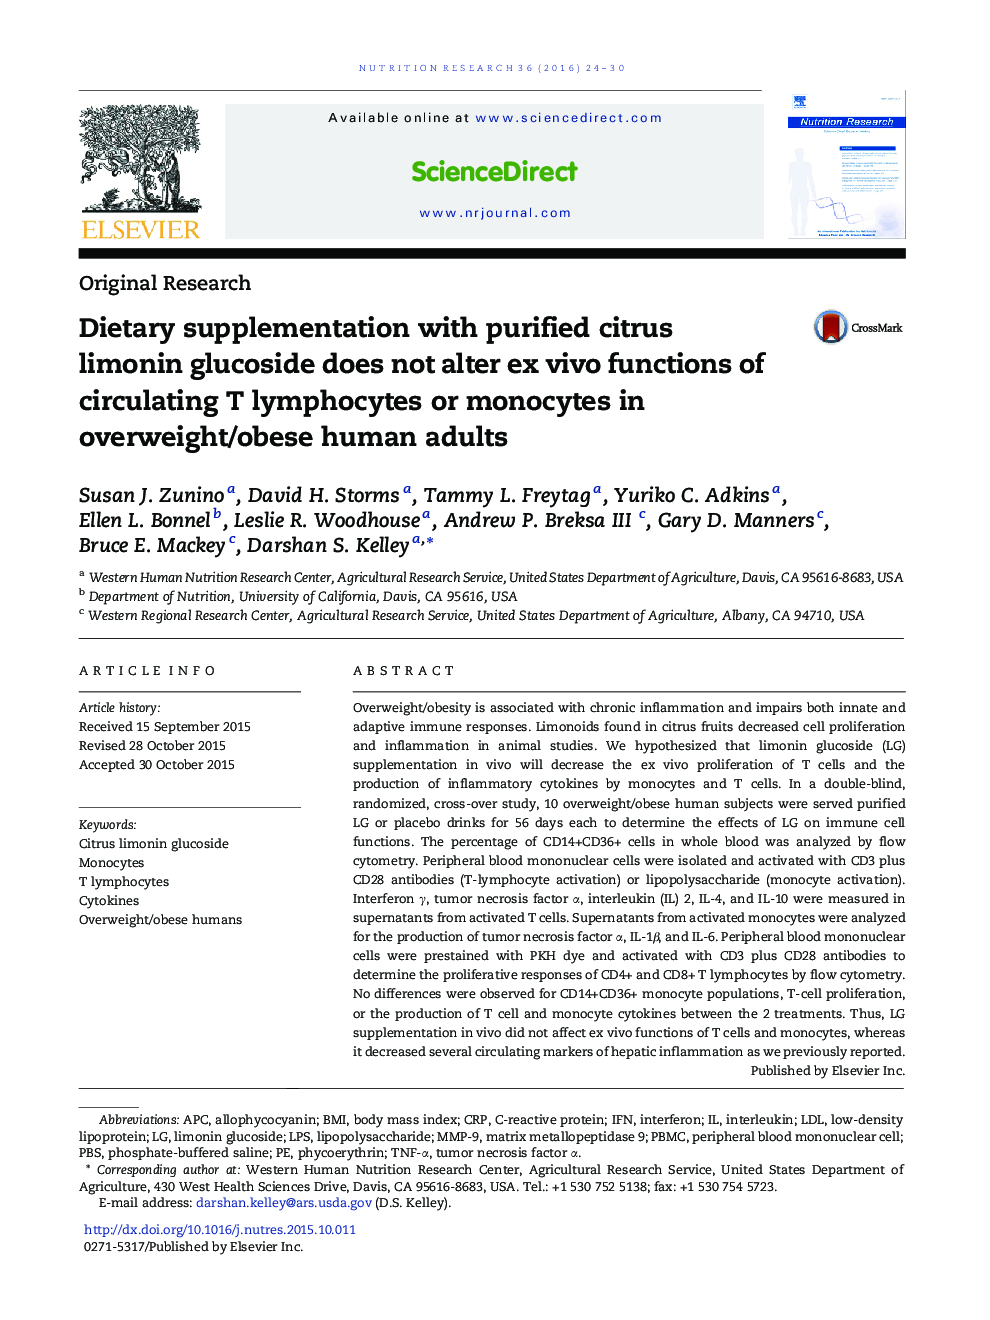 Dietary supplementation with purified citrus limonin glucoside does not alter ex vivo functions of circulating T lymphocytes or monocytes in overweight/obese human adults